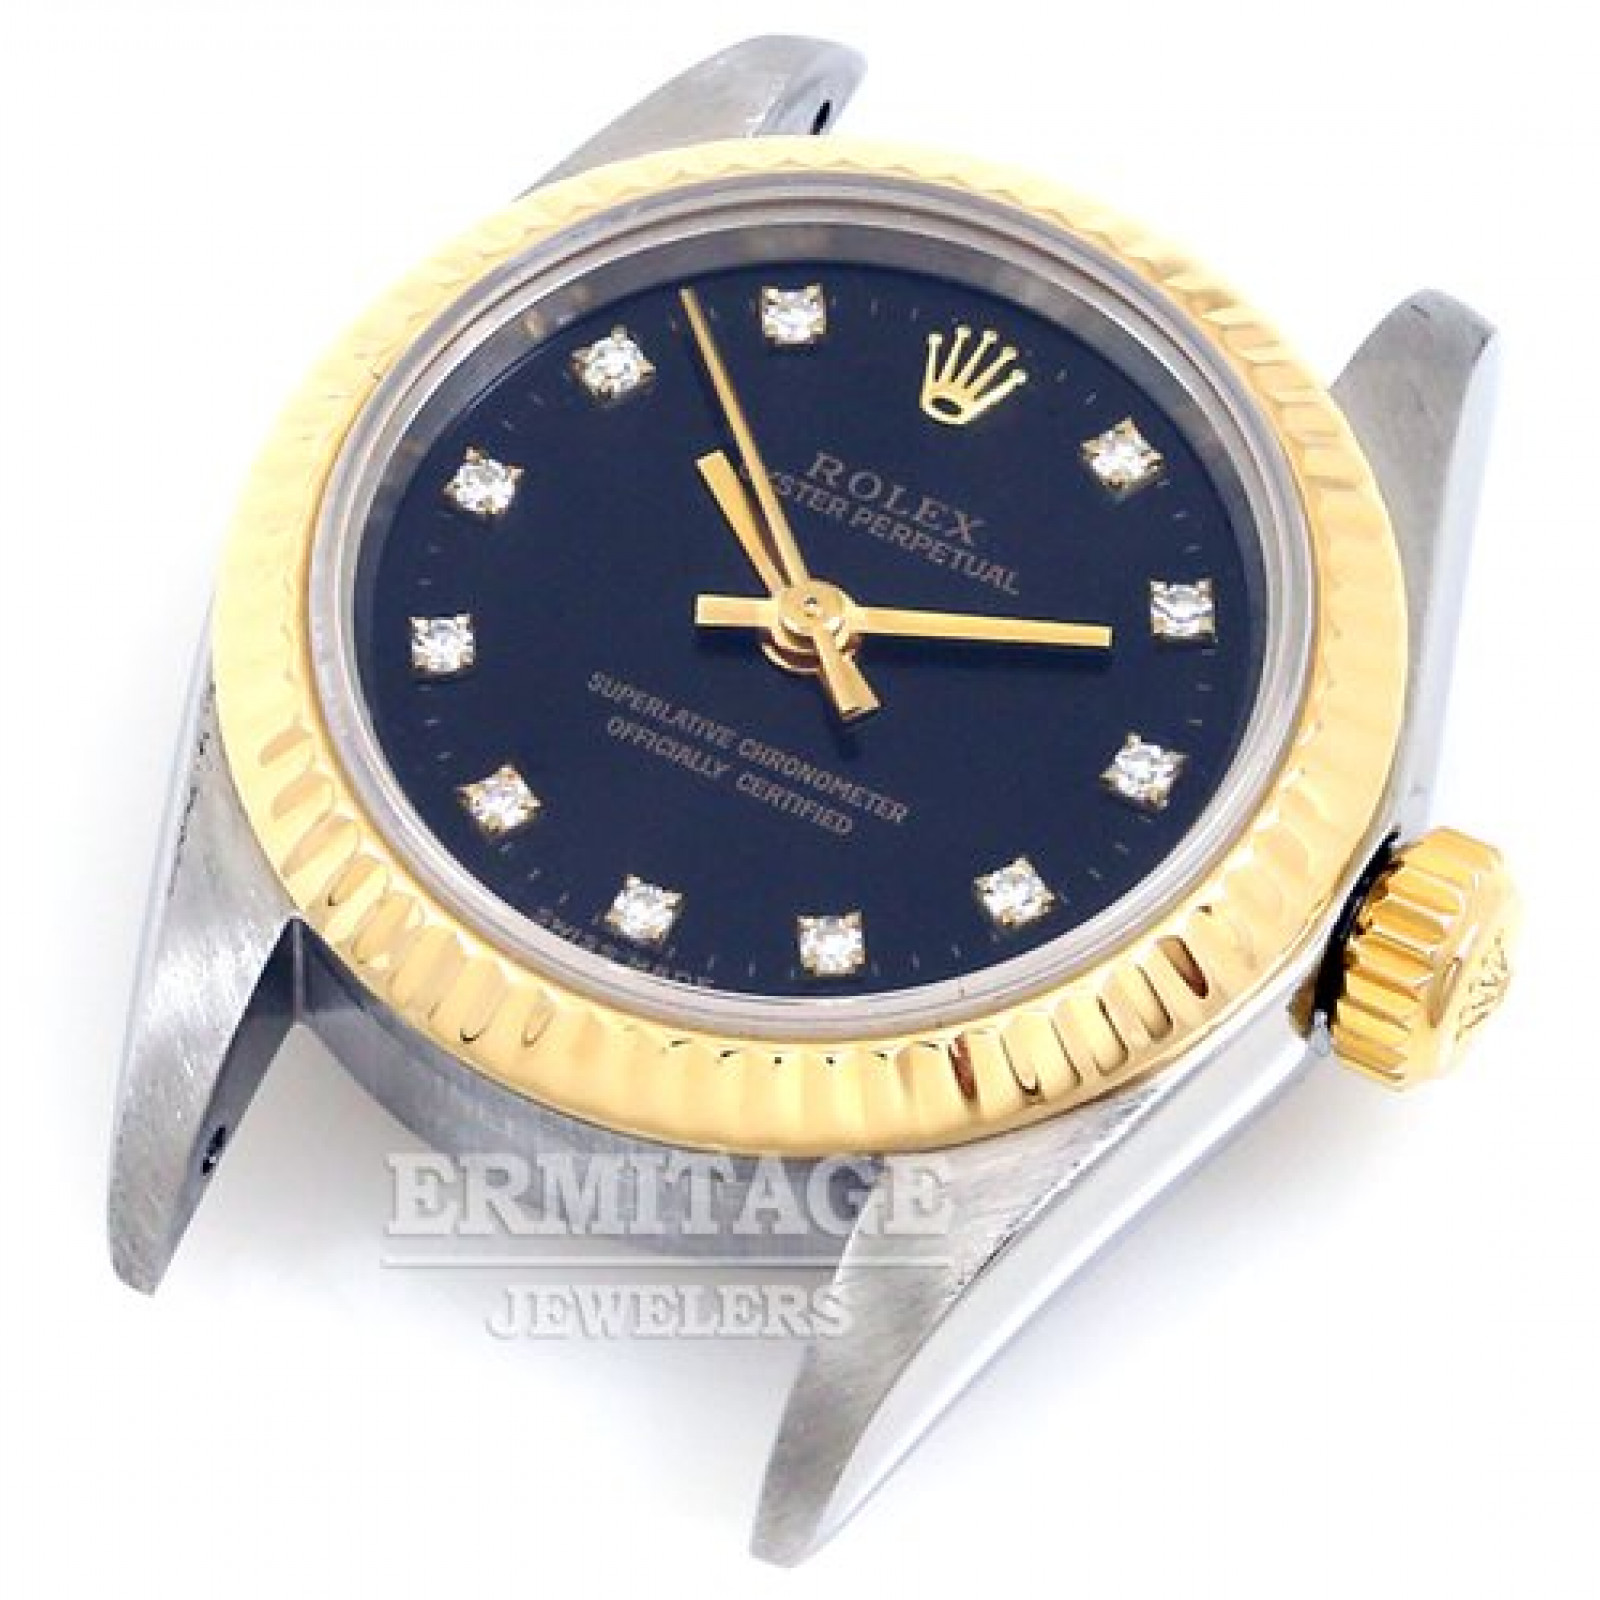 Black Diamond Dial Rolex Oyster Perpetual 67193